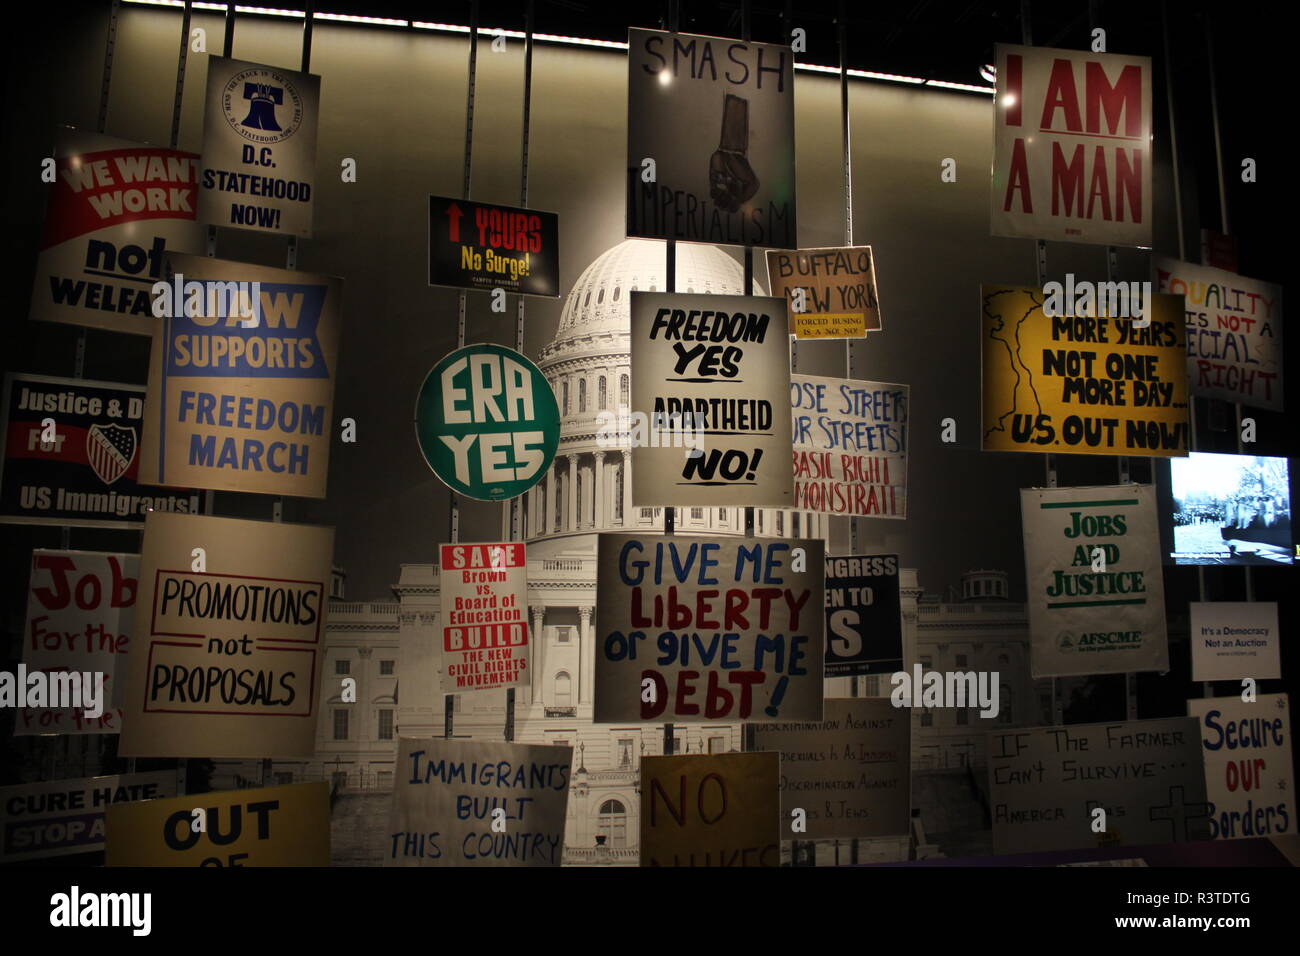 Civil Rights exhibit at the Smithsonian Museum of American History, Washington DC Stock Photo